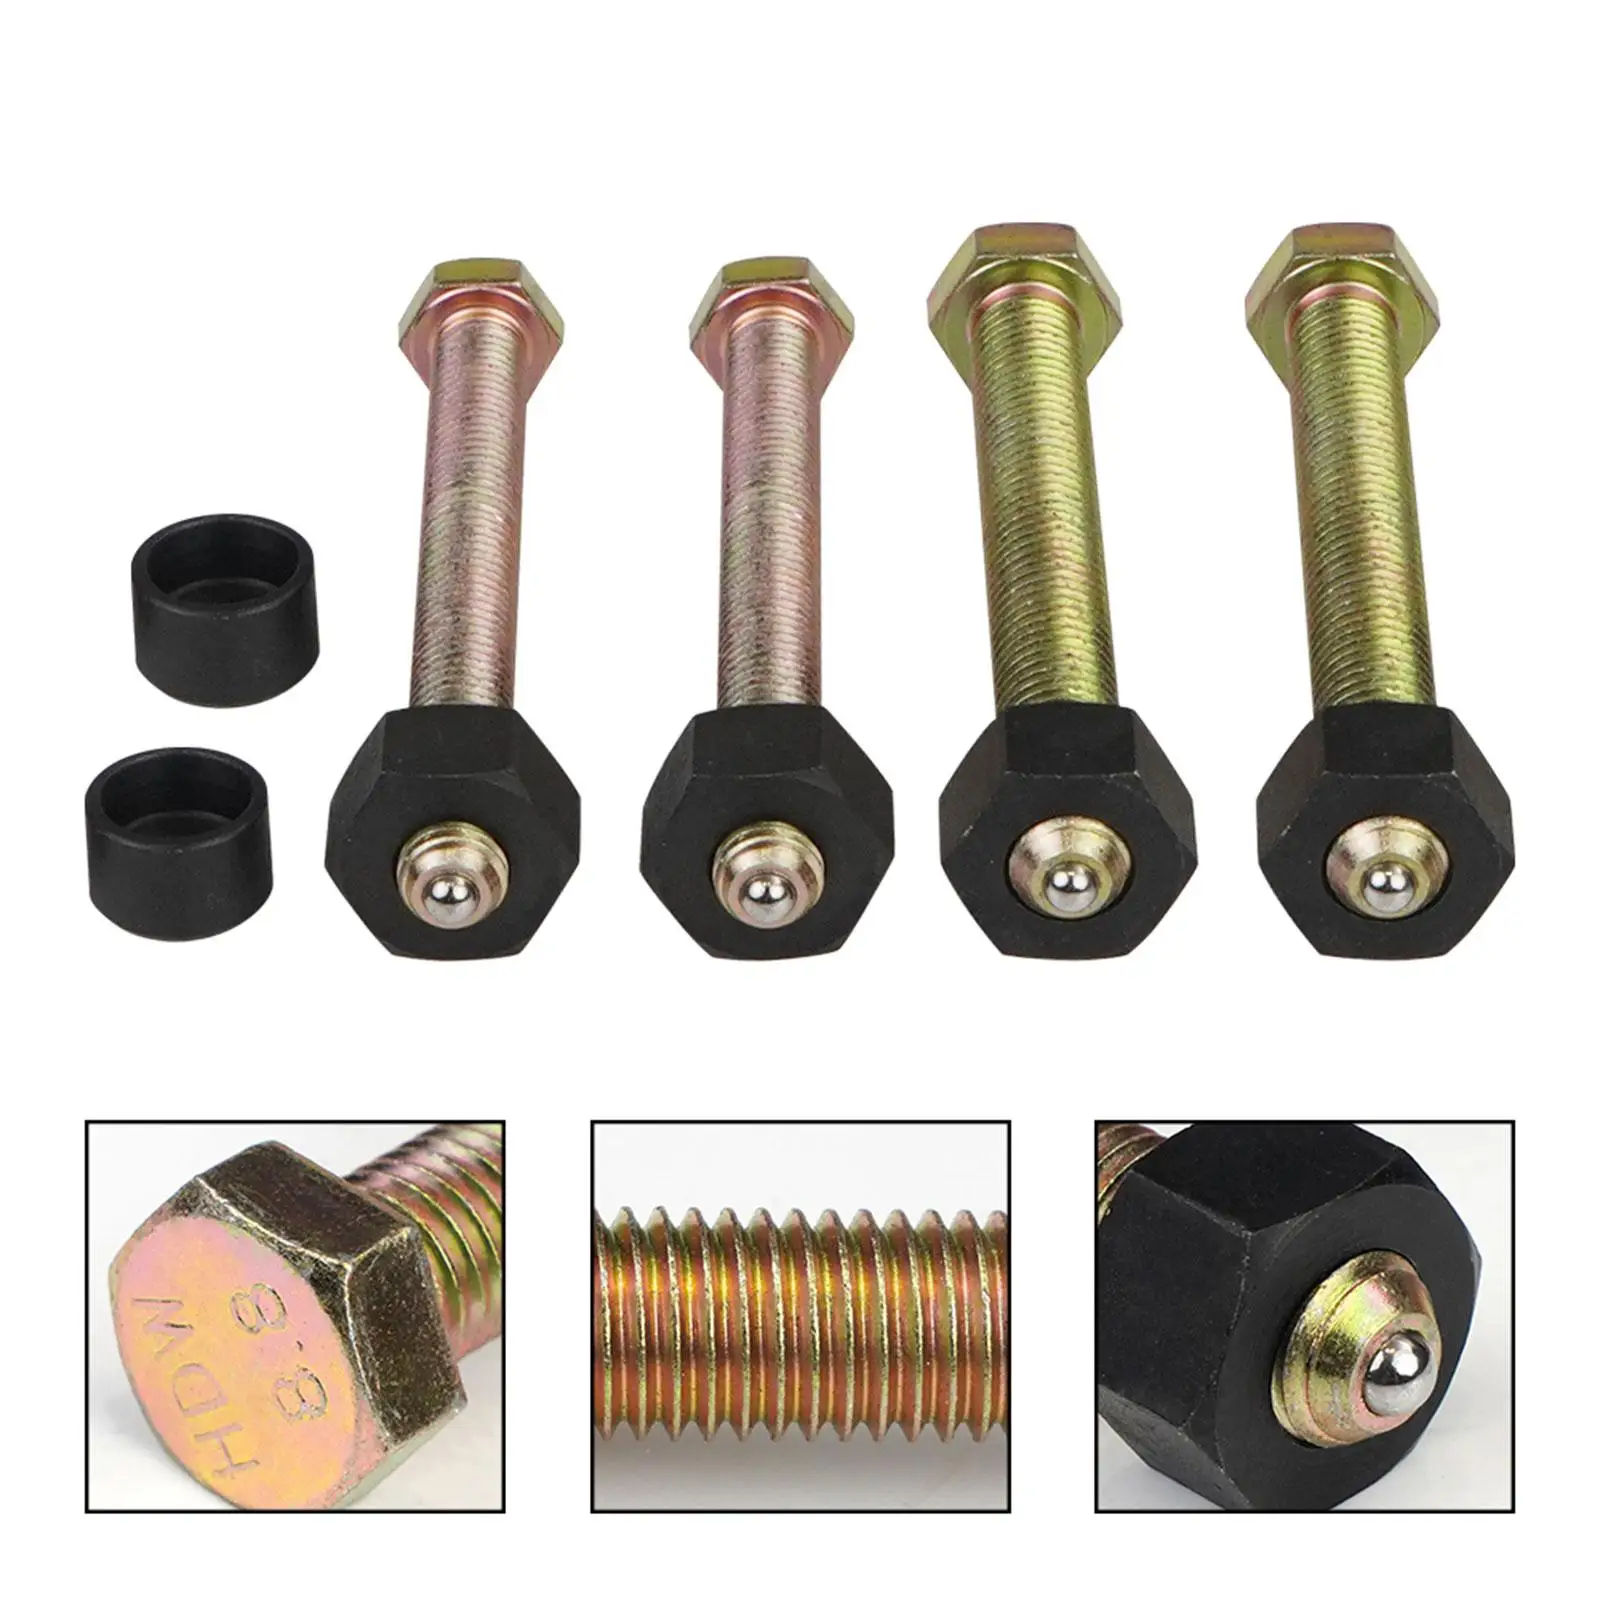 Impact Rated Hub Removal Bolt Set 78834 Accessories Replaces Easy Installation Assembly Repair Parts Wheel Hub Removal Tool